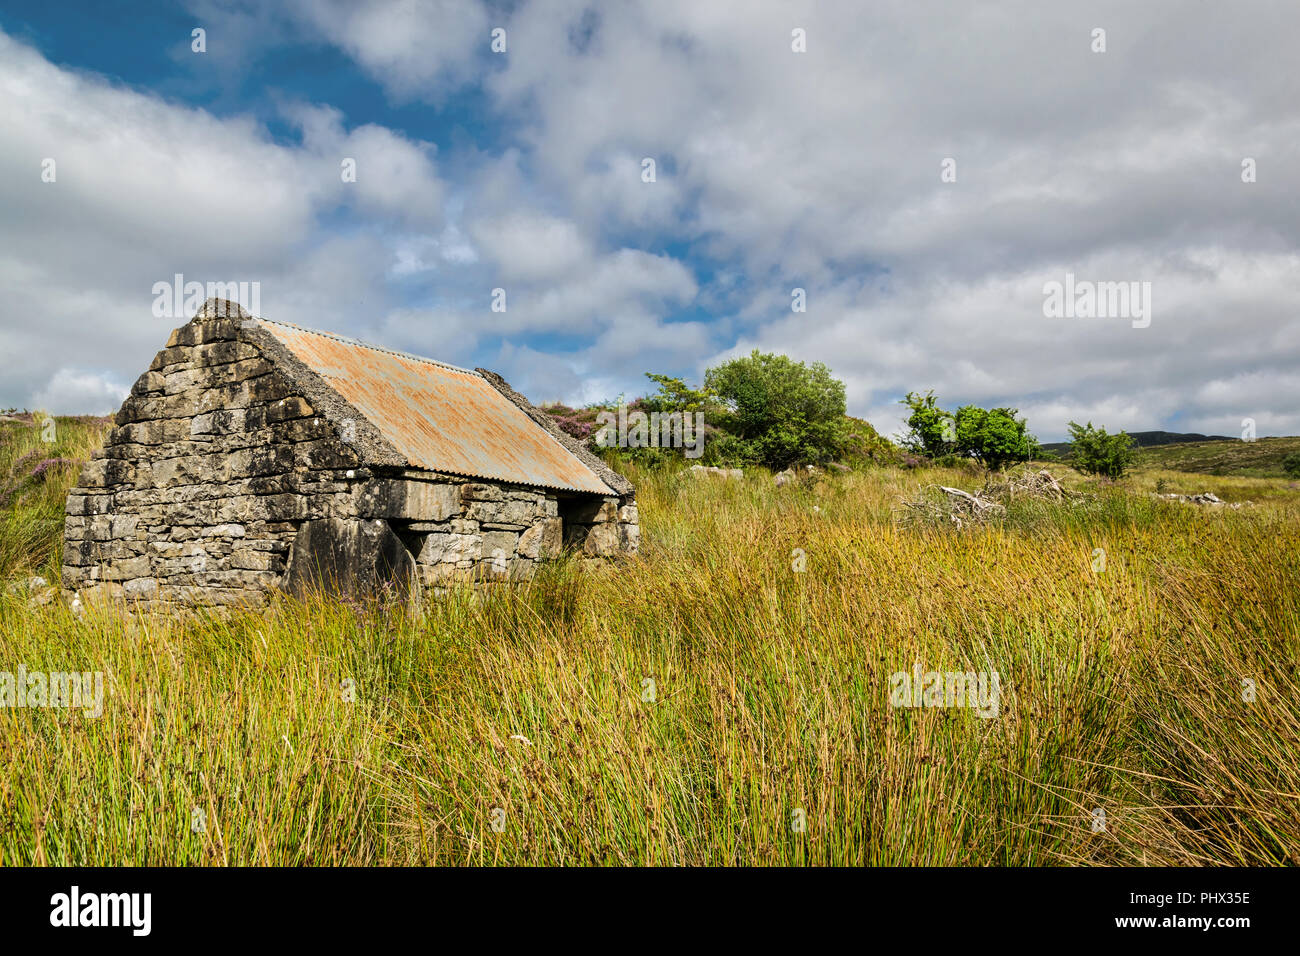 This is a picture of a small stone building in a field in Ireland.  I believe is used to store food for sheep. Stock Photo